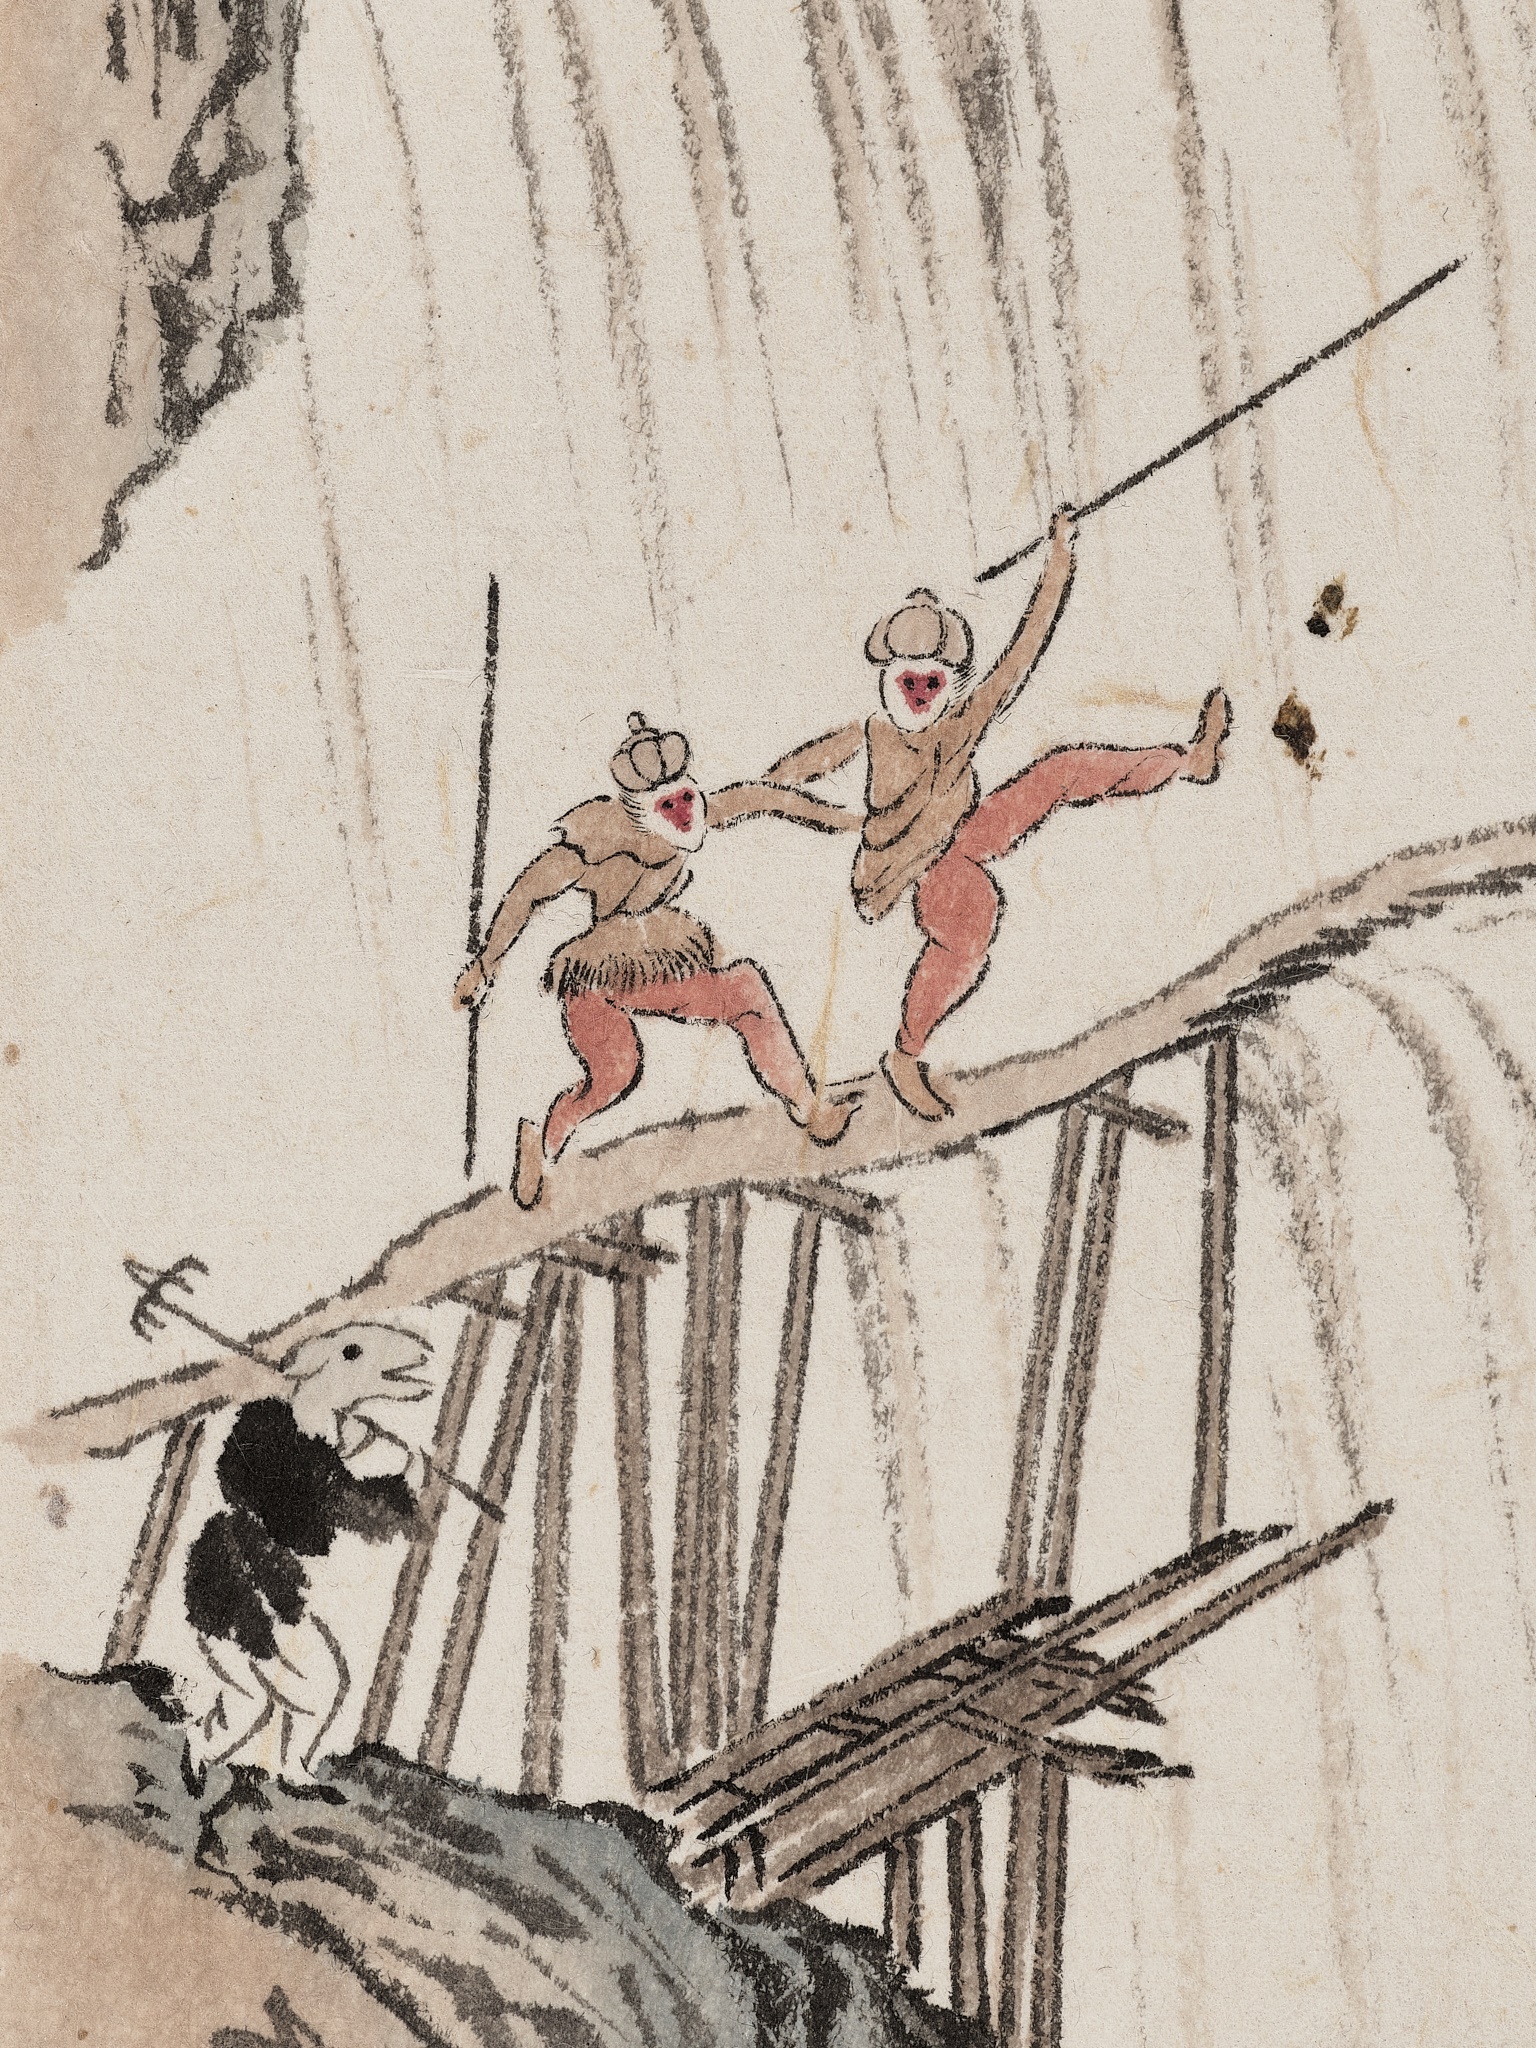 A SCENE FROM 'JOURNEY TO THE WEST', BY PU RU (1896-1963) - Image 9 of 10